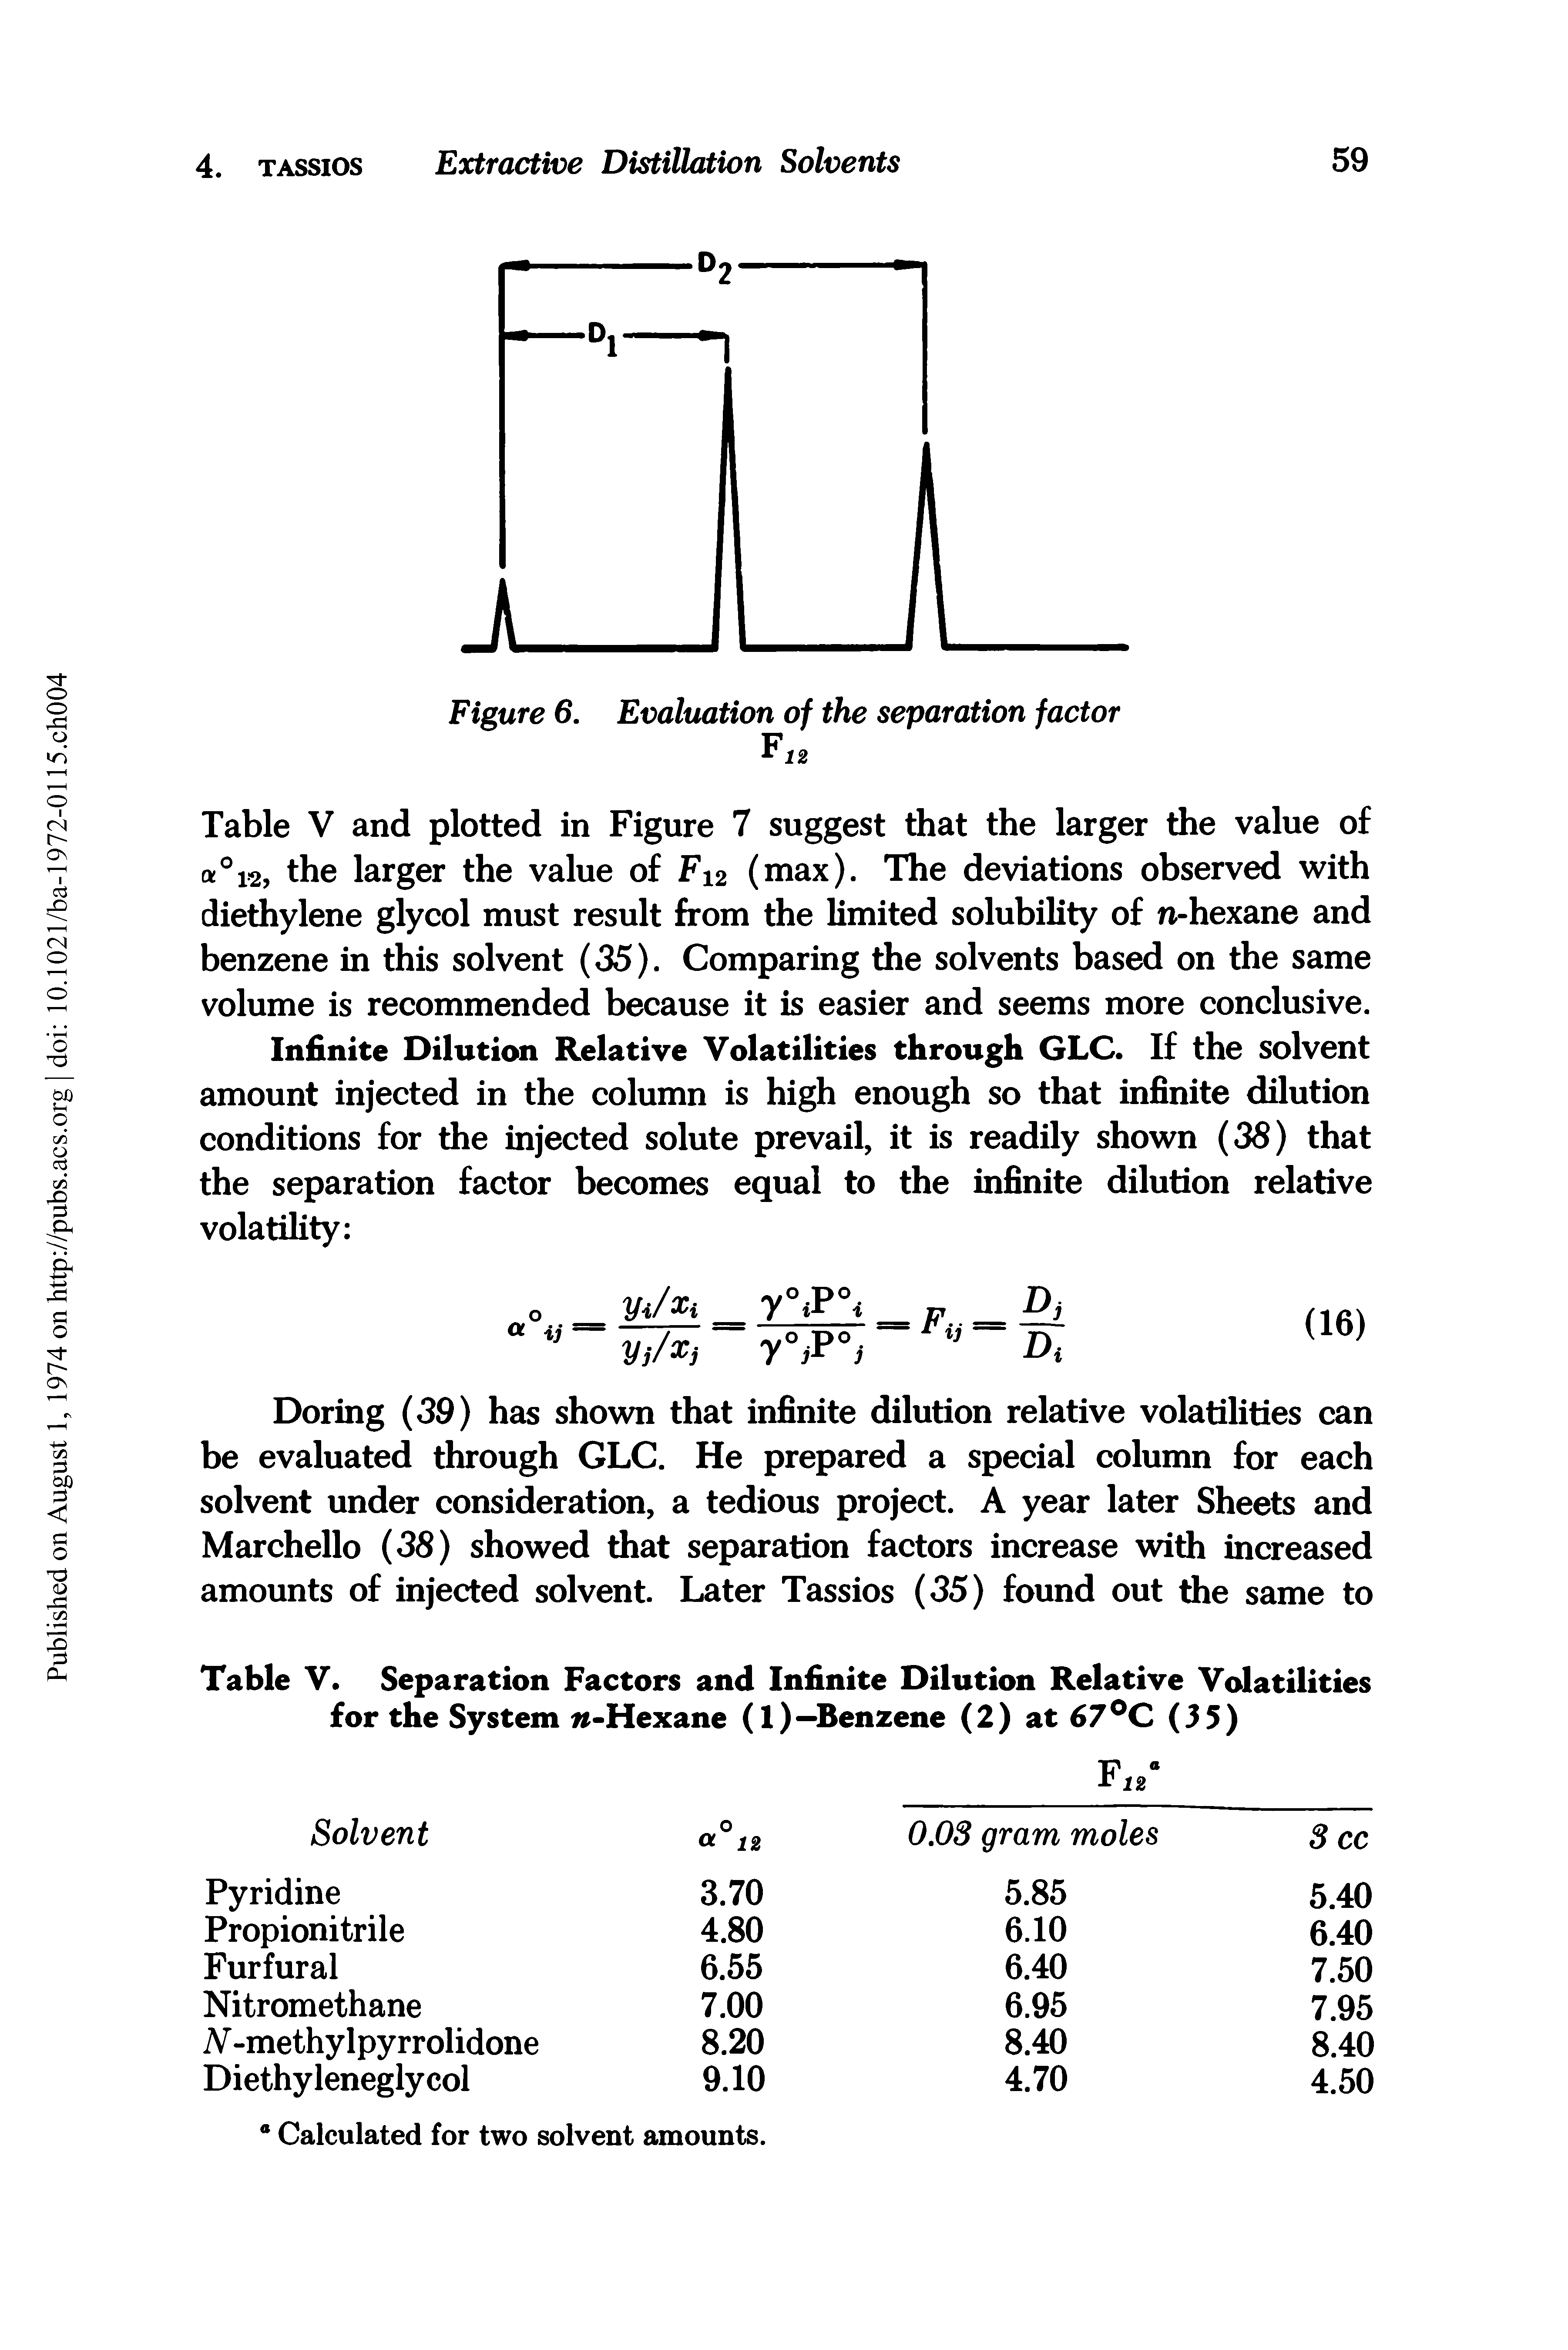 Table V. Separation Factors and Infinite Dilution Relative Volatilities for the System ft-Hexane (l)-Benzene (2) at 67°C (35)...